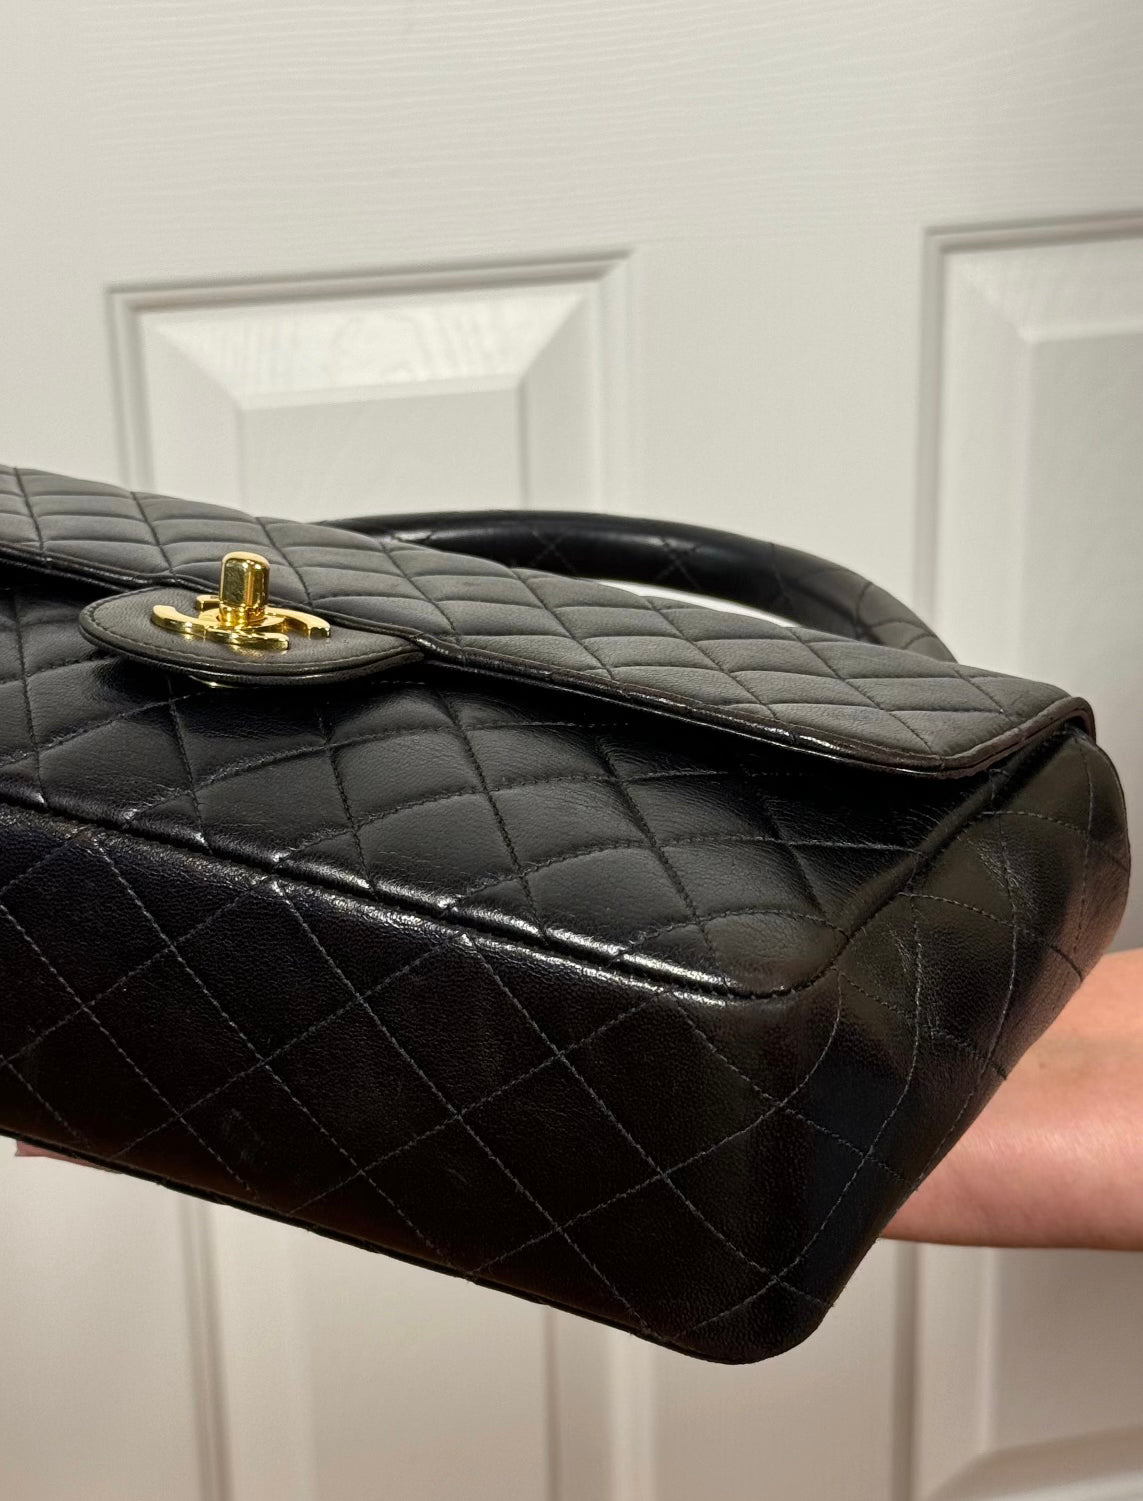 Chanel Vintage 90s Black Quilted Lambskin Medium Kelly Top Handle Parent Flap Bag w 24K Gold Plated Hardware